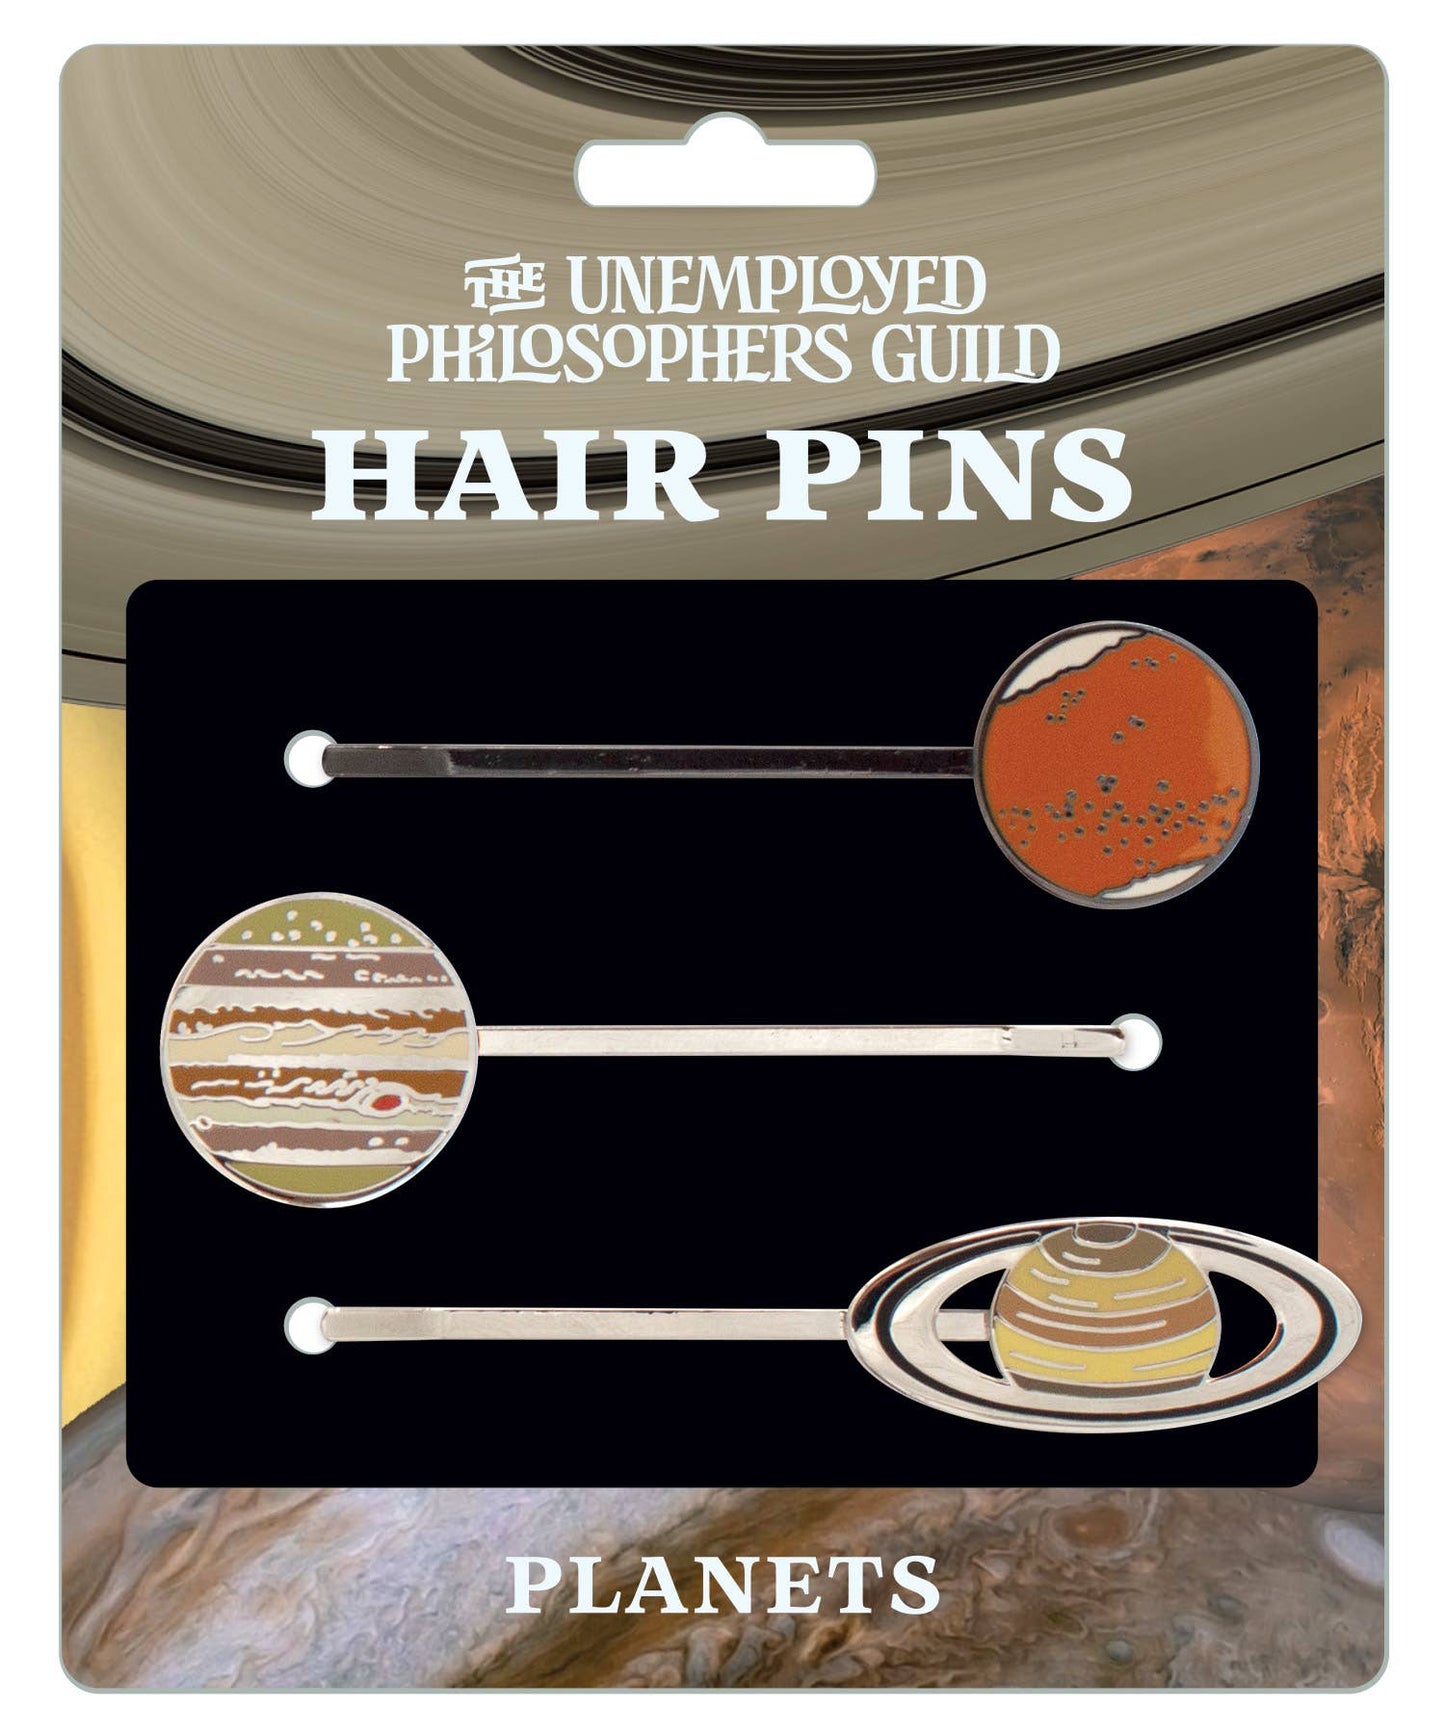 Planet Hair Pins from Unemployed Philosophers Guild